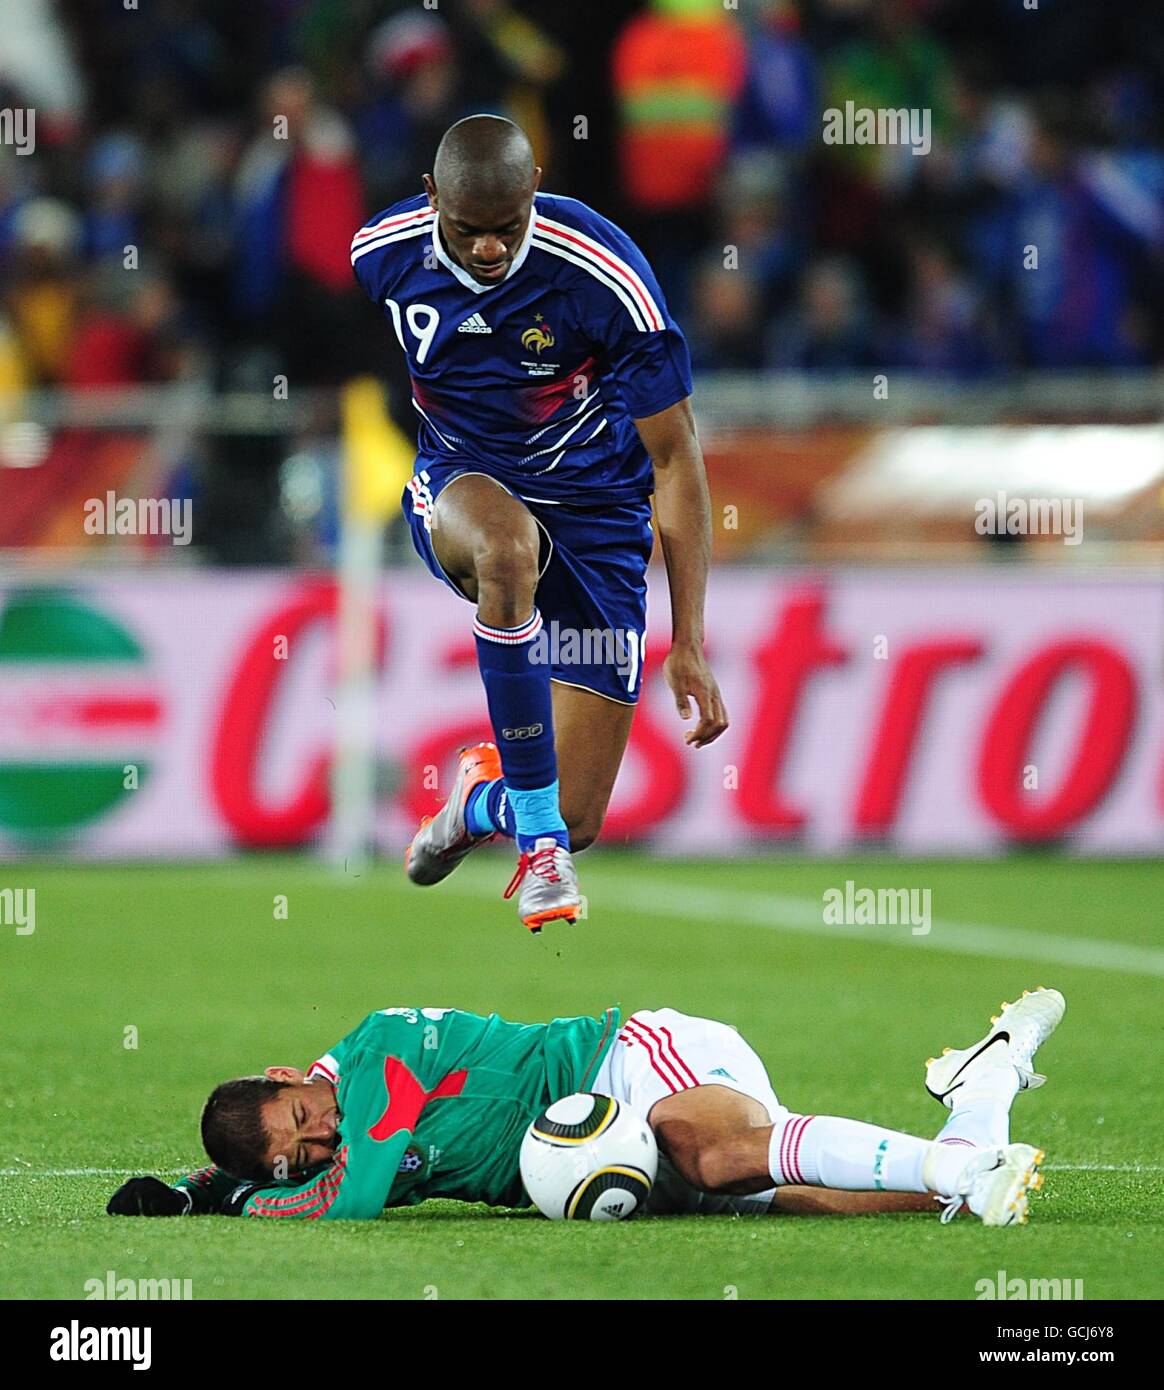 France's Vassiriki Diaby jumps over Mexico's Javier Hernandez after battling him to the ball. Stock Photo